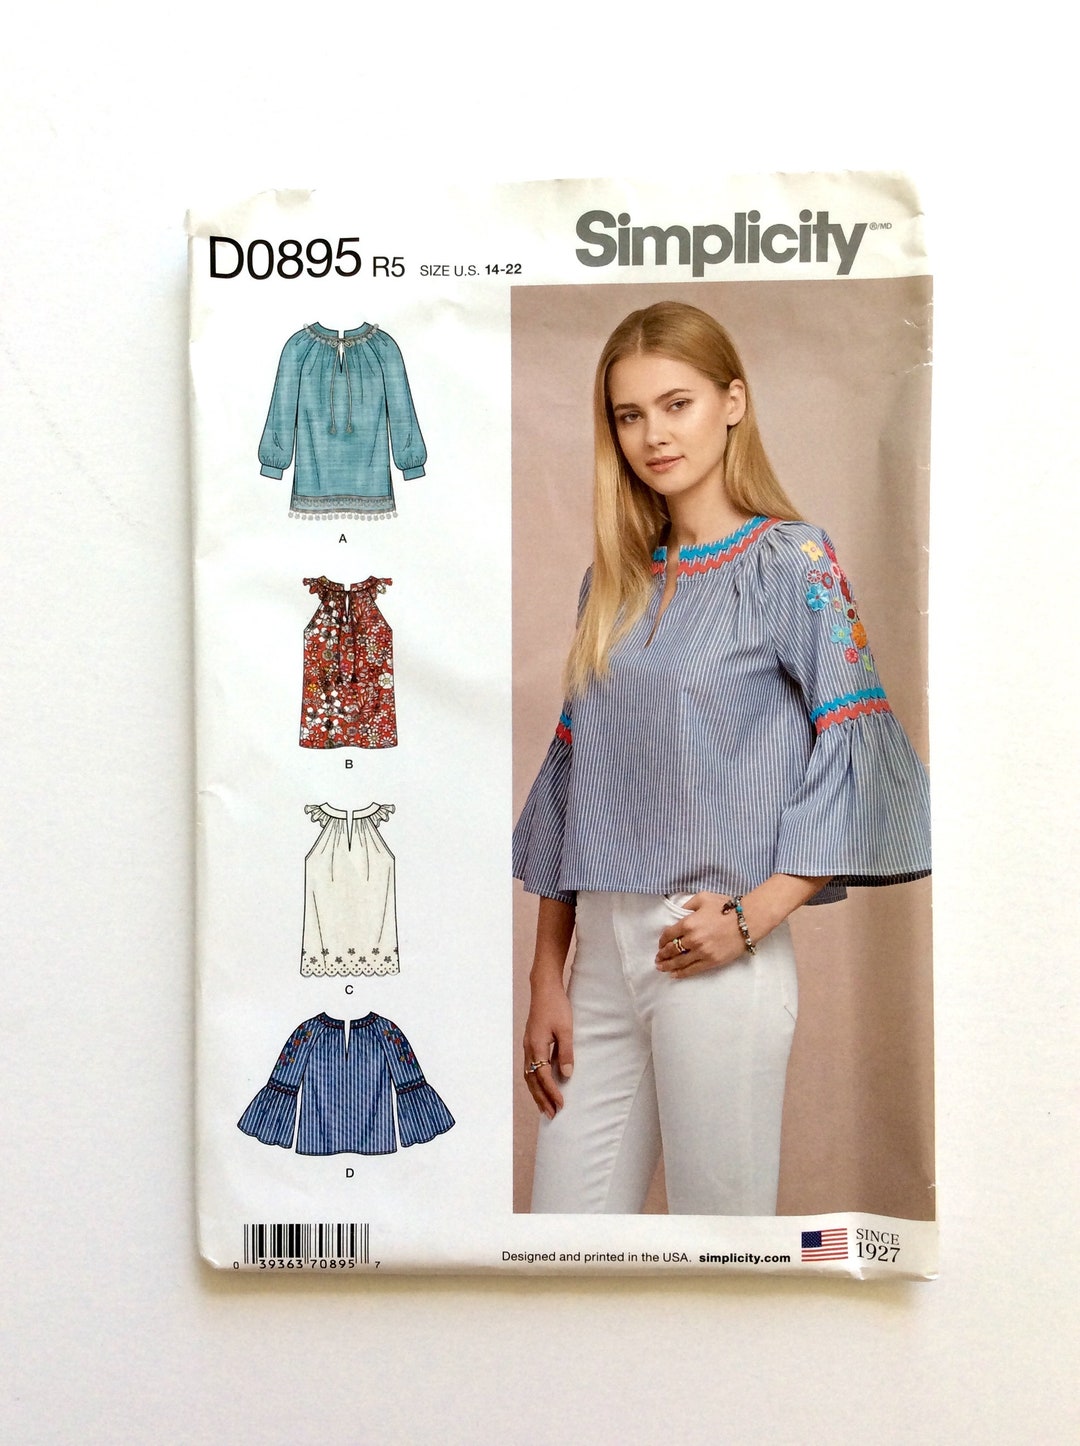 Simplicity D0895 / 8600 Women's Top Pattern Pullover Top - Etsy